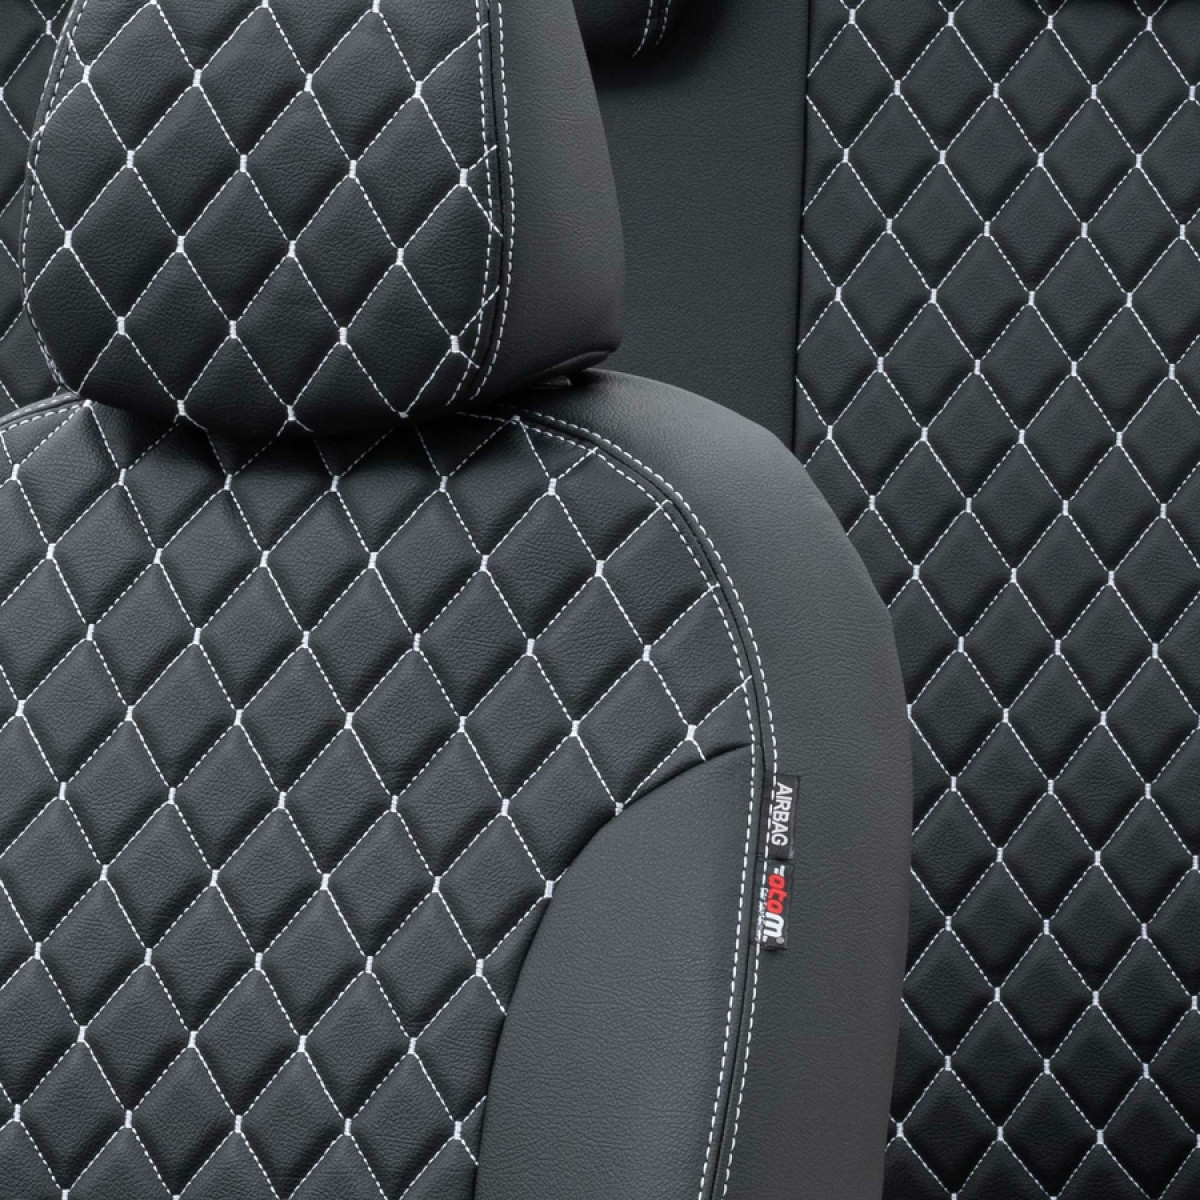  BREMER SITZBEZÜGE Seat Covers for Car Seats Compatible with Opel  Corsa C 2001-2006 Driver and Passenger Protective Covers Seat Protector  Seat Cover FB:115 (Black/Grey Pattern) : Everything Else